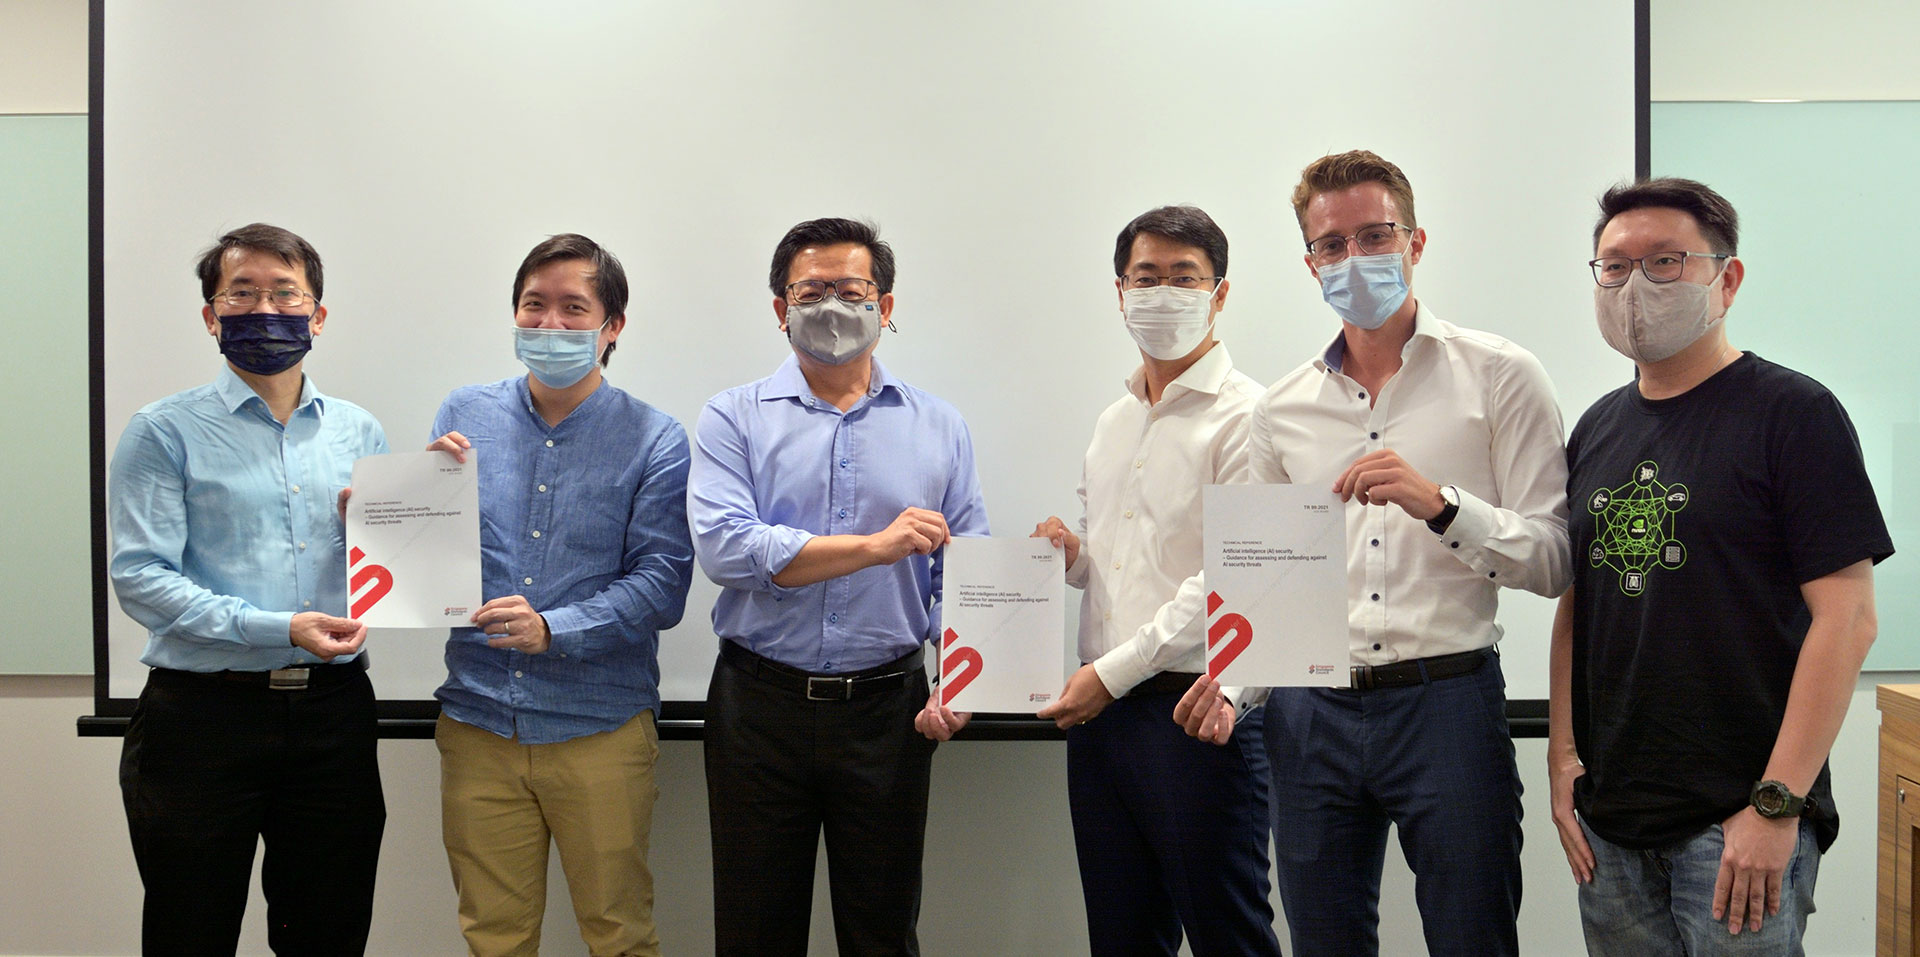 A group of men wearing mask are holding certificates.